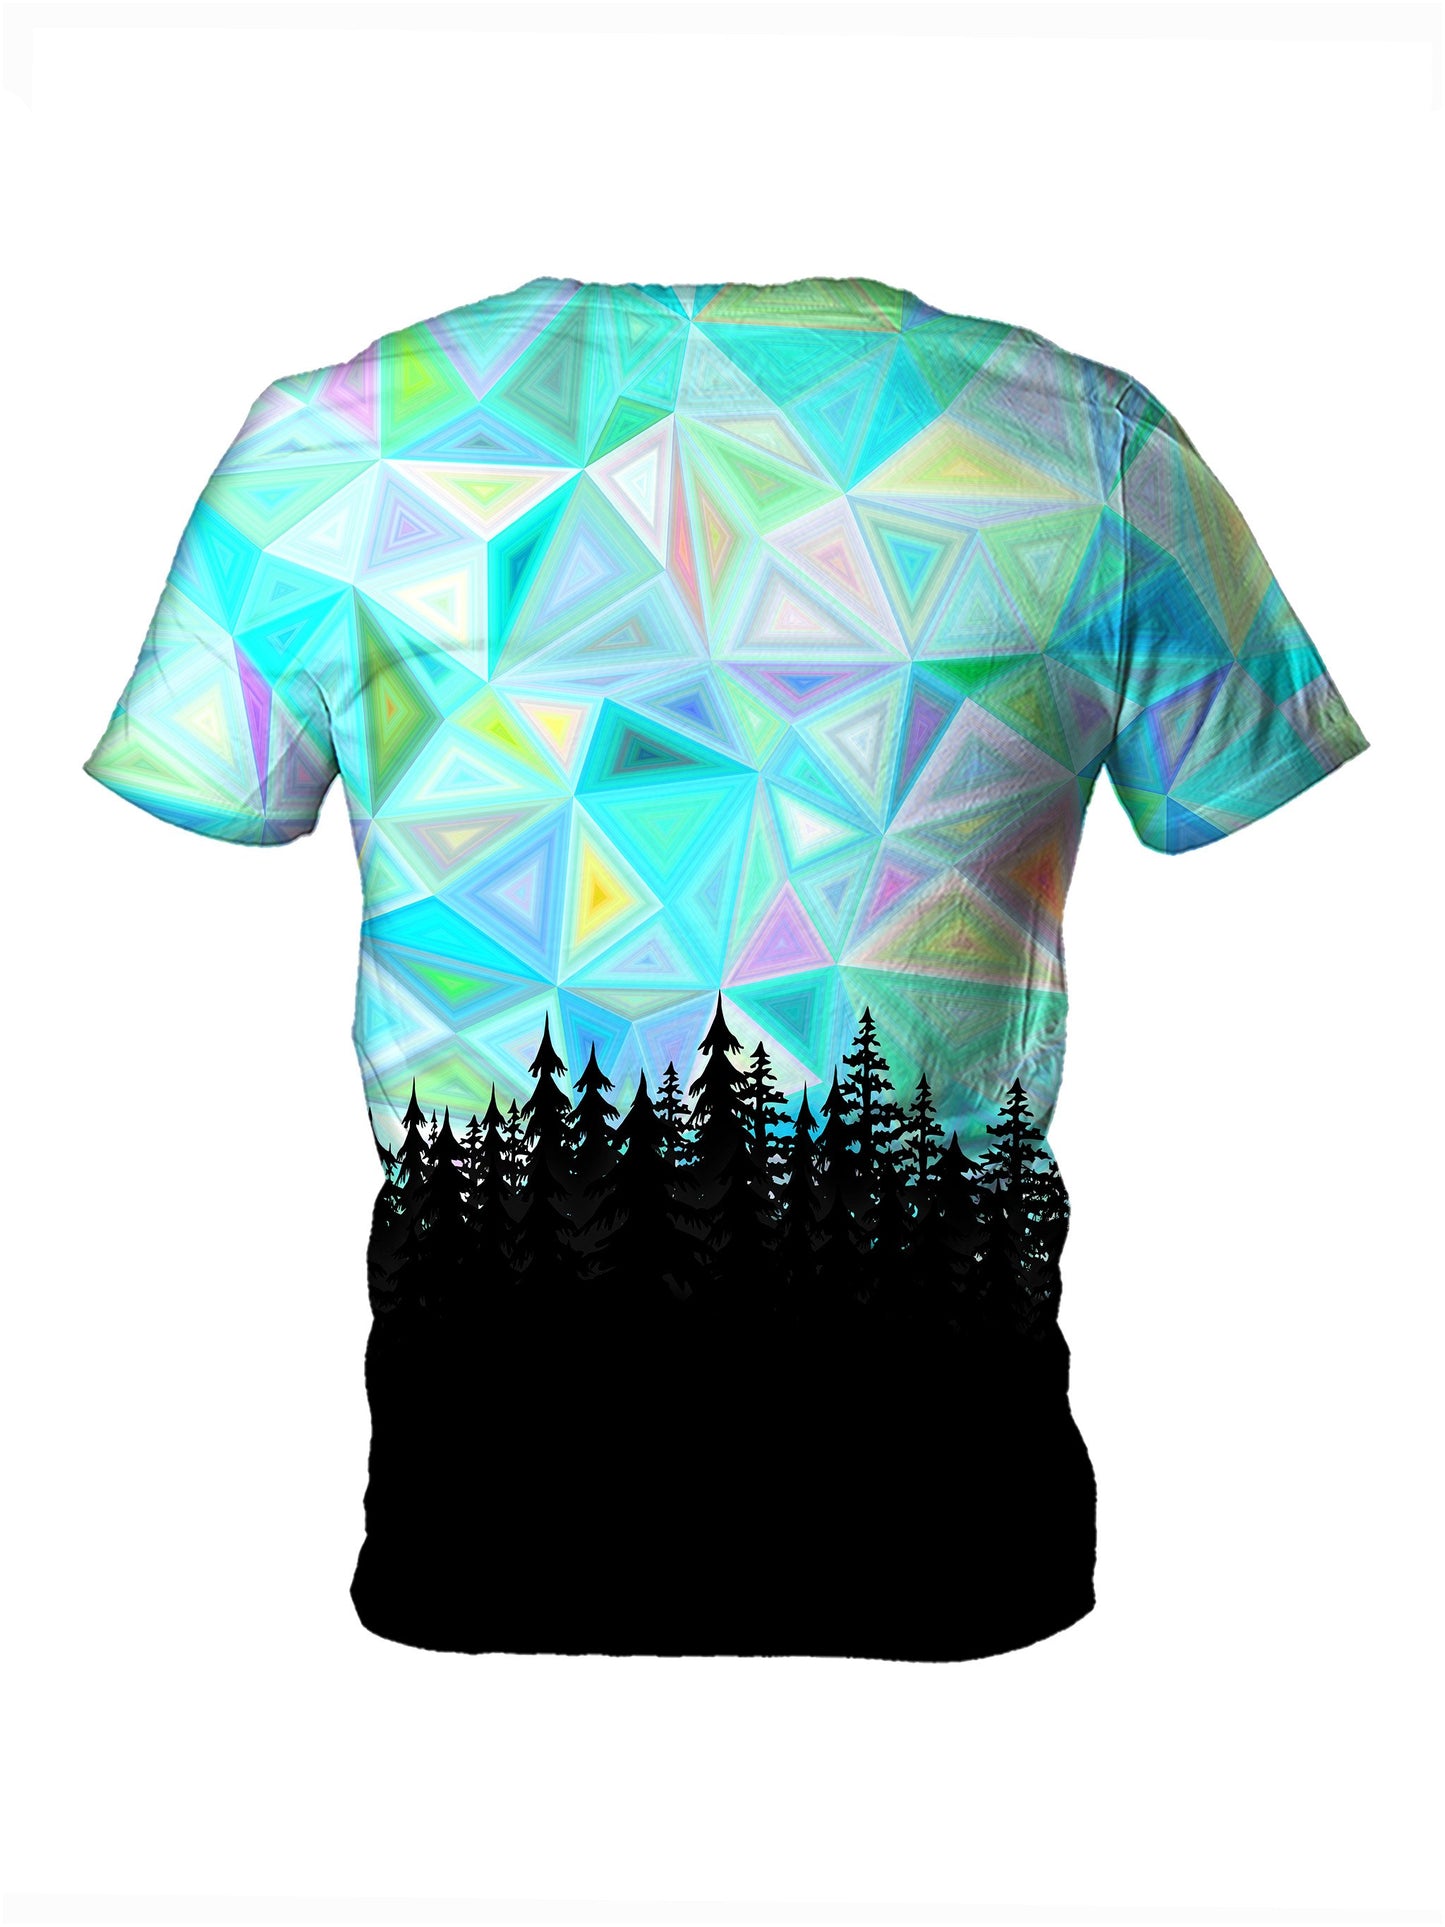 Back view of all over print psychedelic nature t shirt by Gratefully Dyed Apparel. 